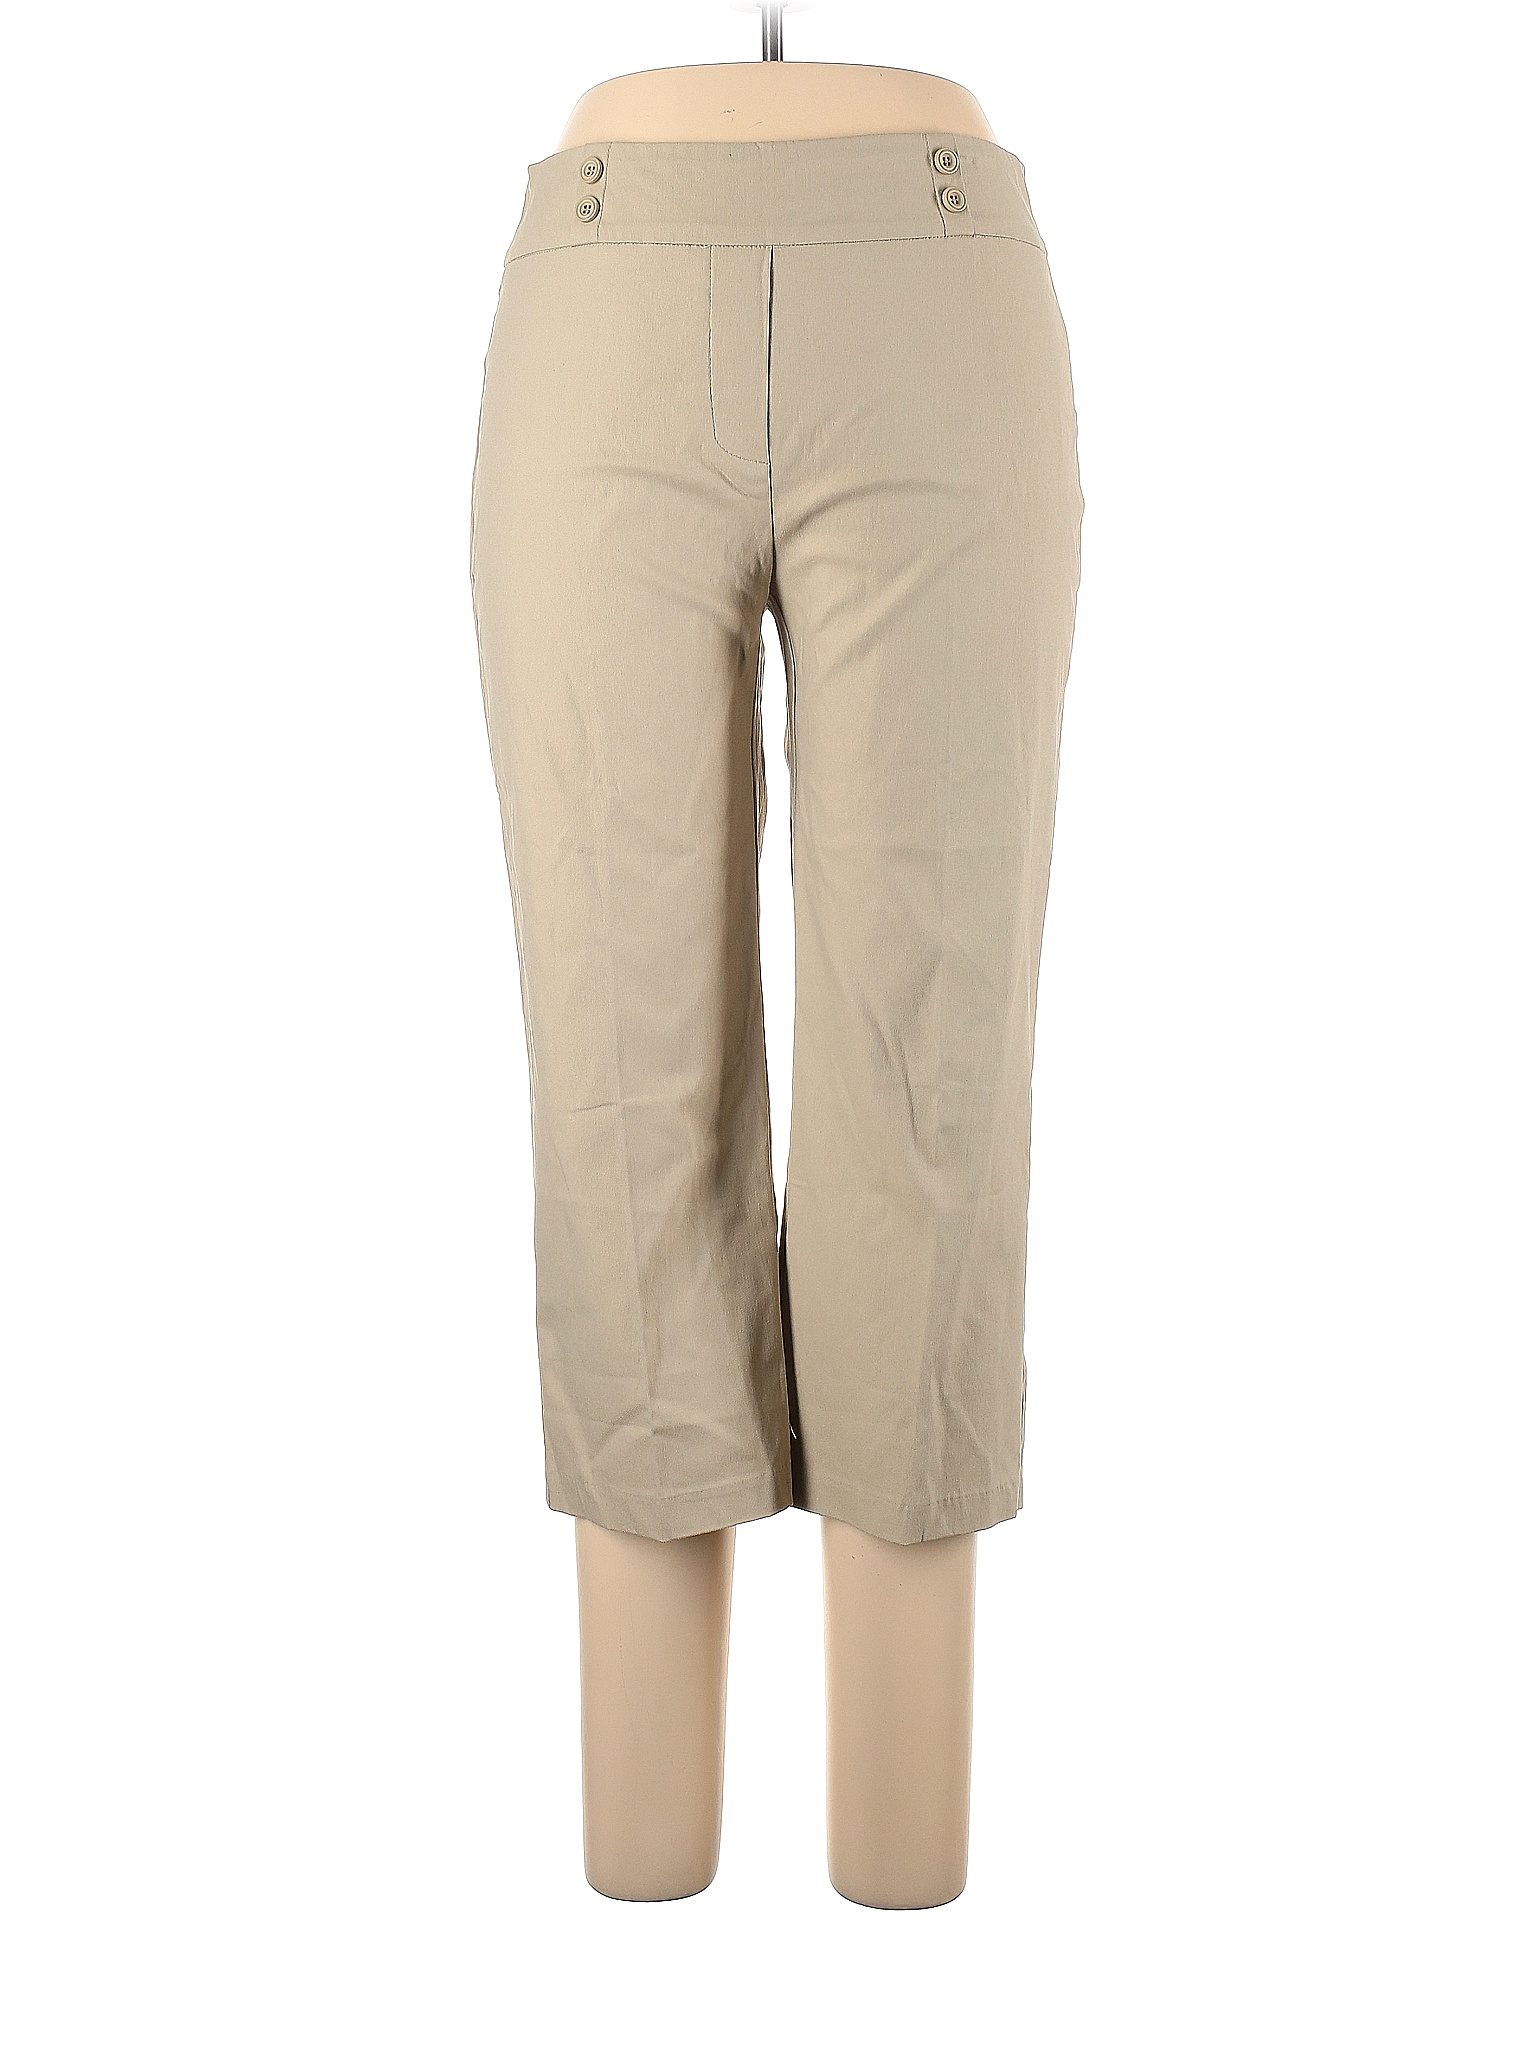 Rekucci Solid Colored Tan Khakis Size 10 - 77% off | thredUP